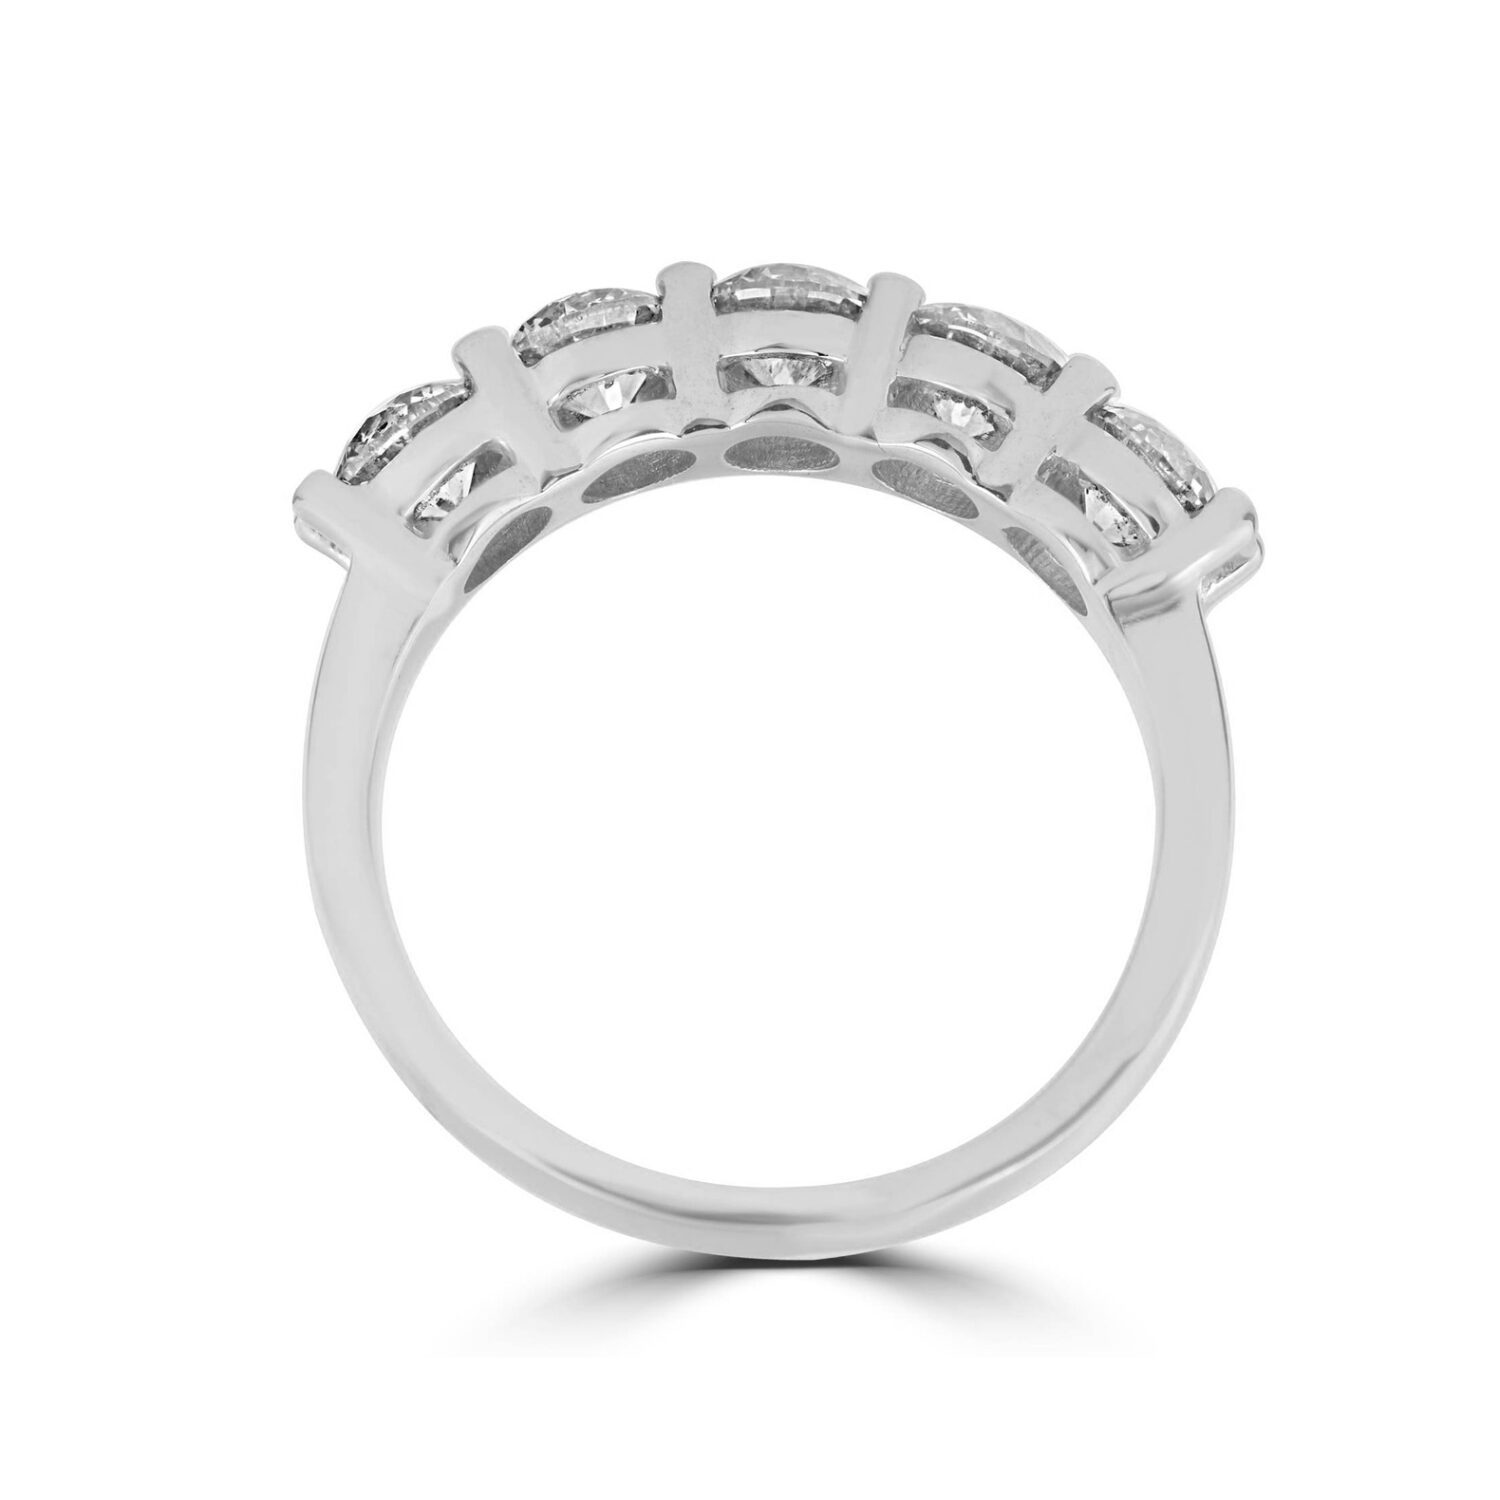 Lab grown diamonds in Cyprus - The 5 Stones 2.5 Carat Half Eternity Band Diamond Ring best quality and price